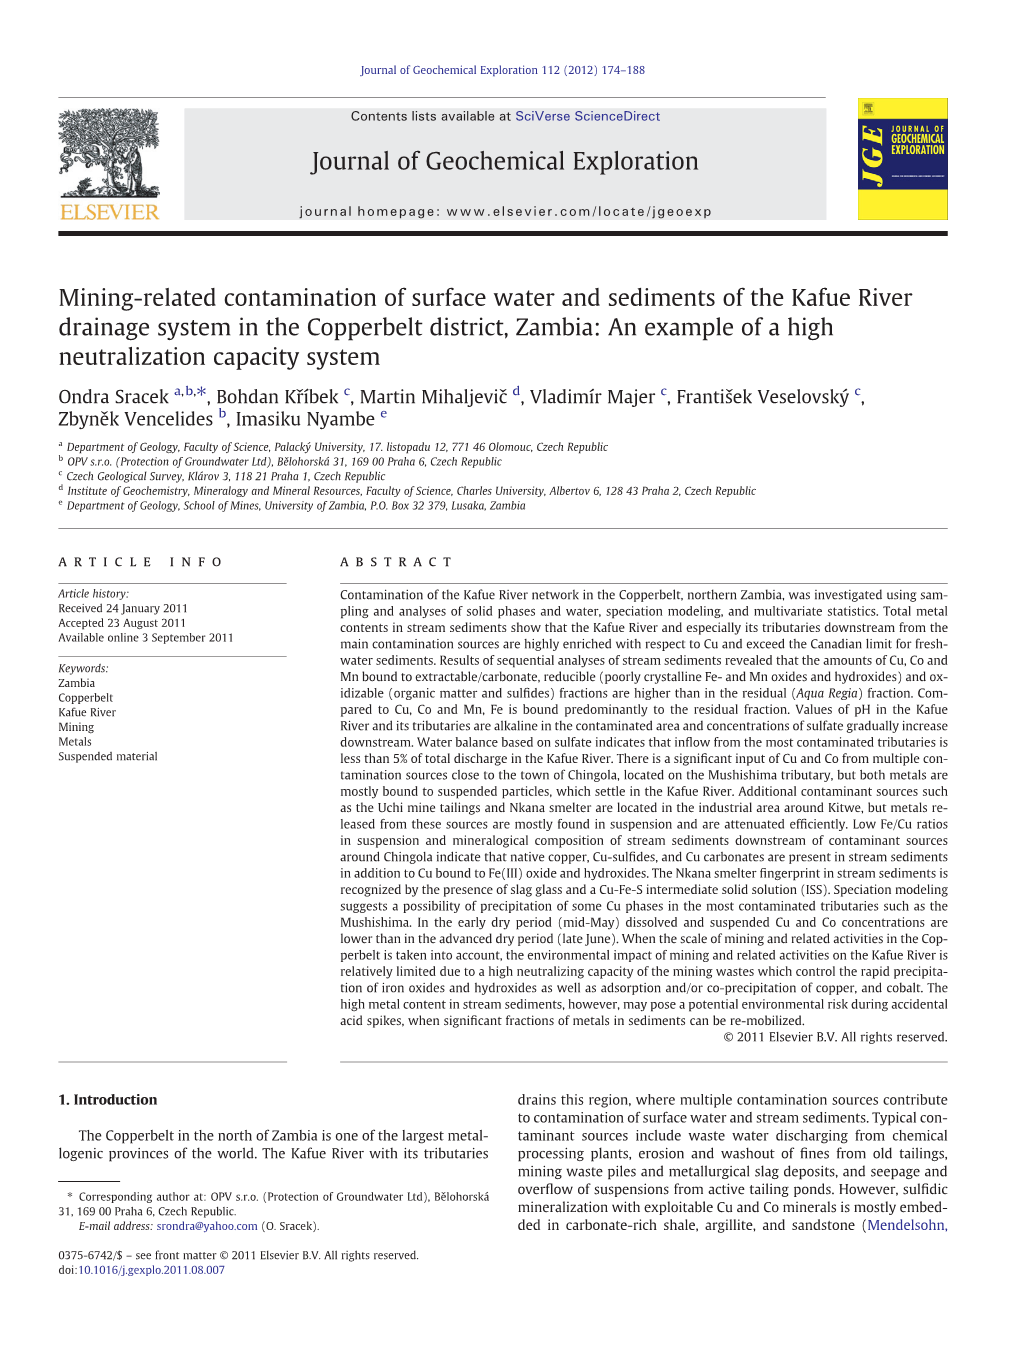 Mining-Related Contamination of Surface Water and Sediments of The